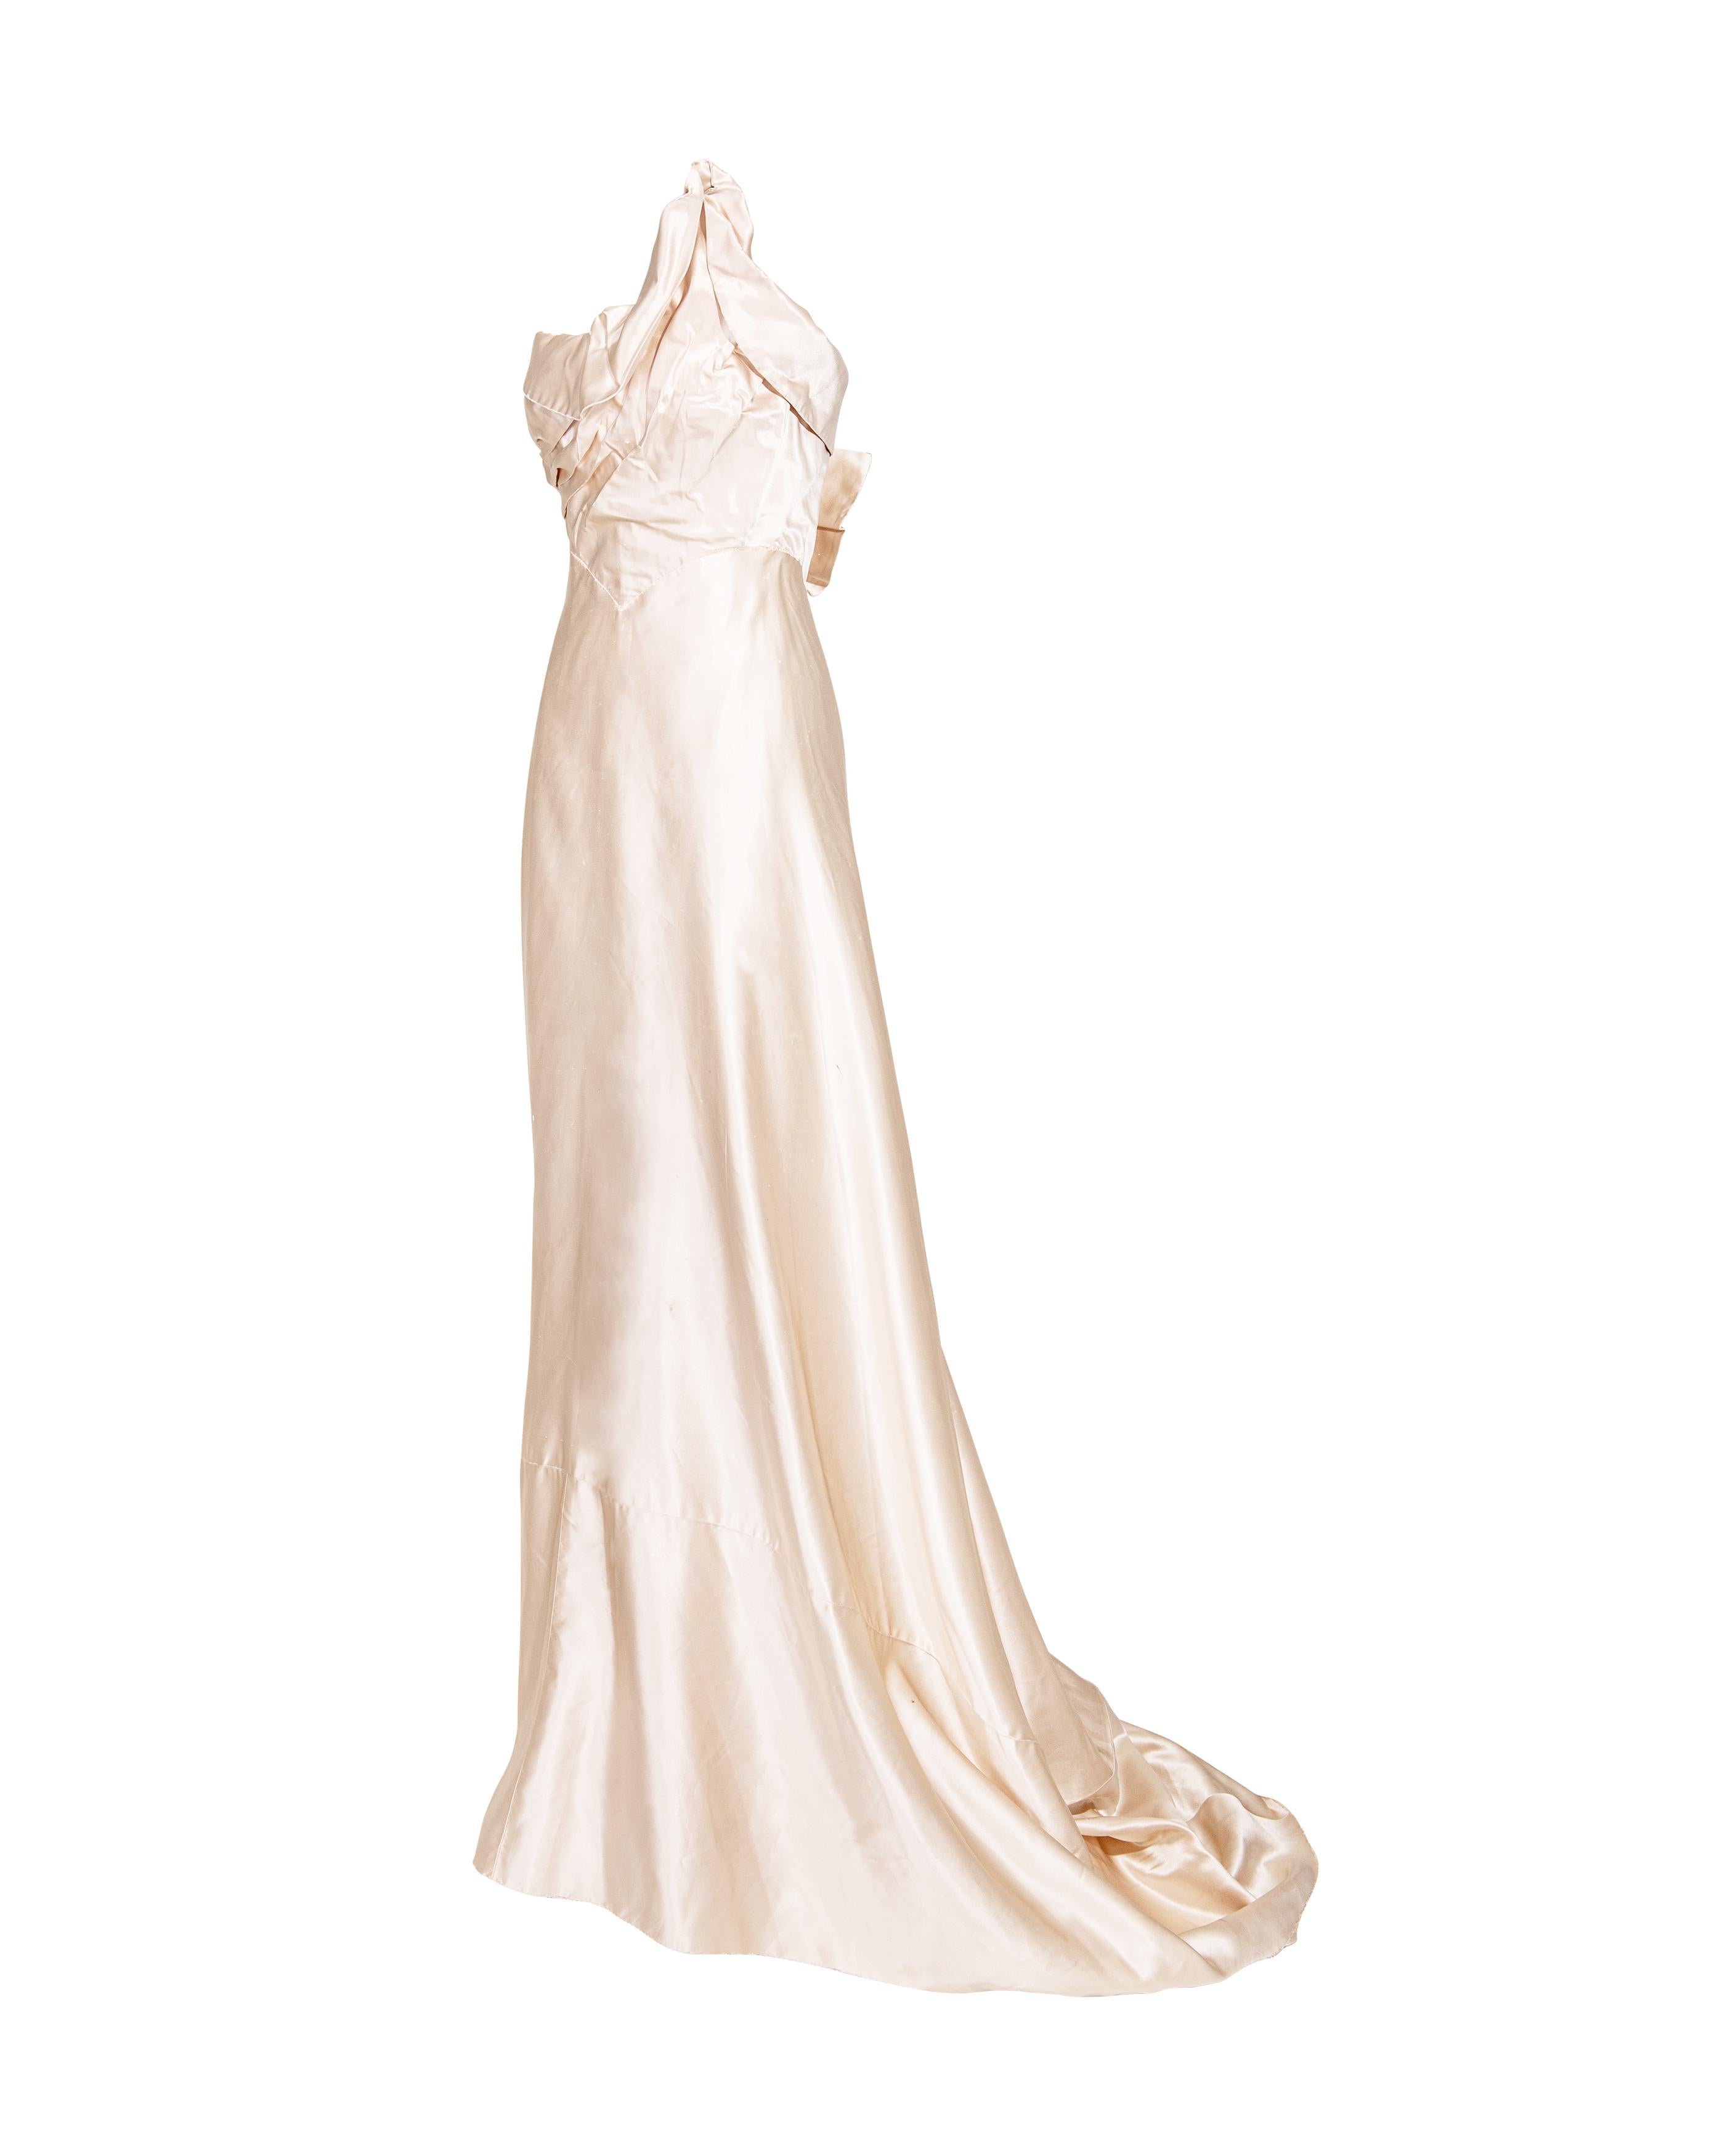 1940's Irene Lentz Haute Couture Strapless High-Low Cream Silk Gown In Good Condition For Sale In North Hollywood, CA